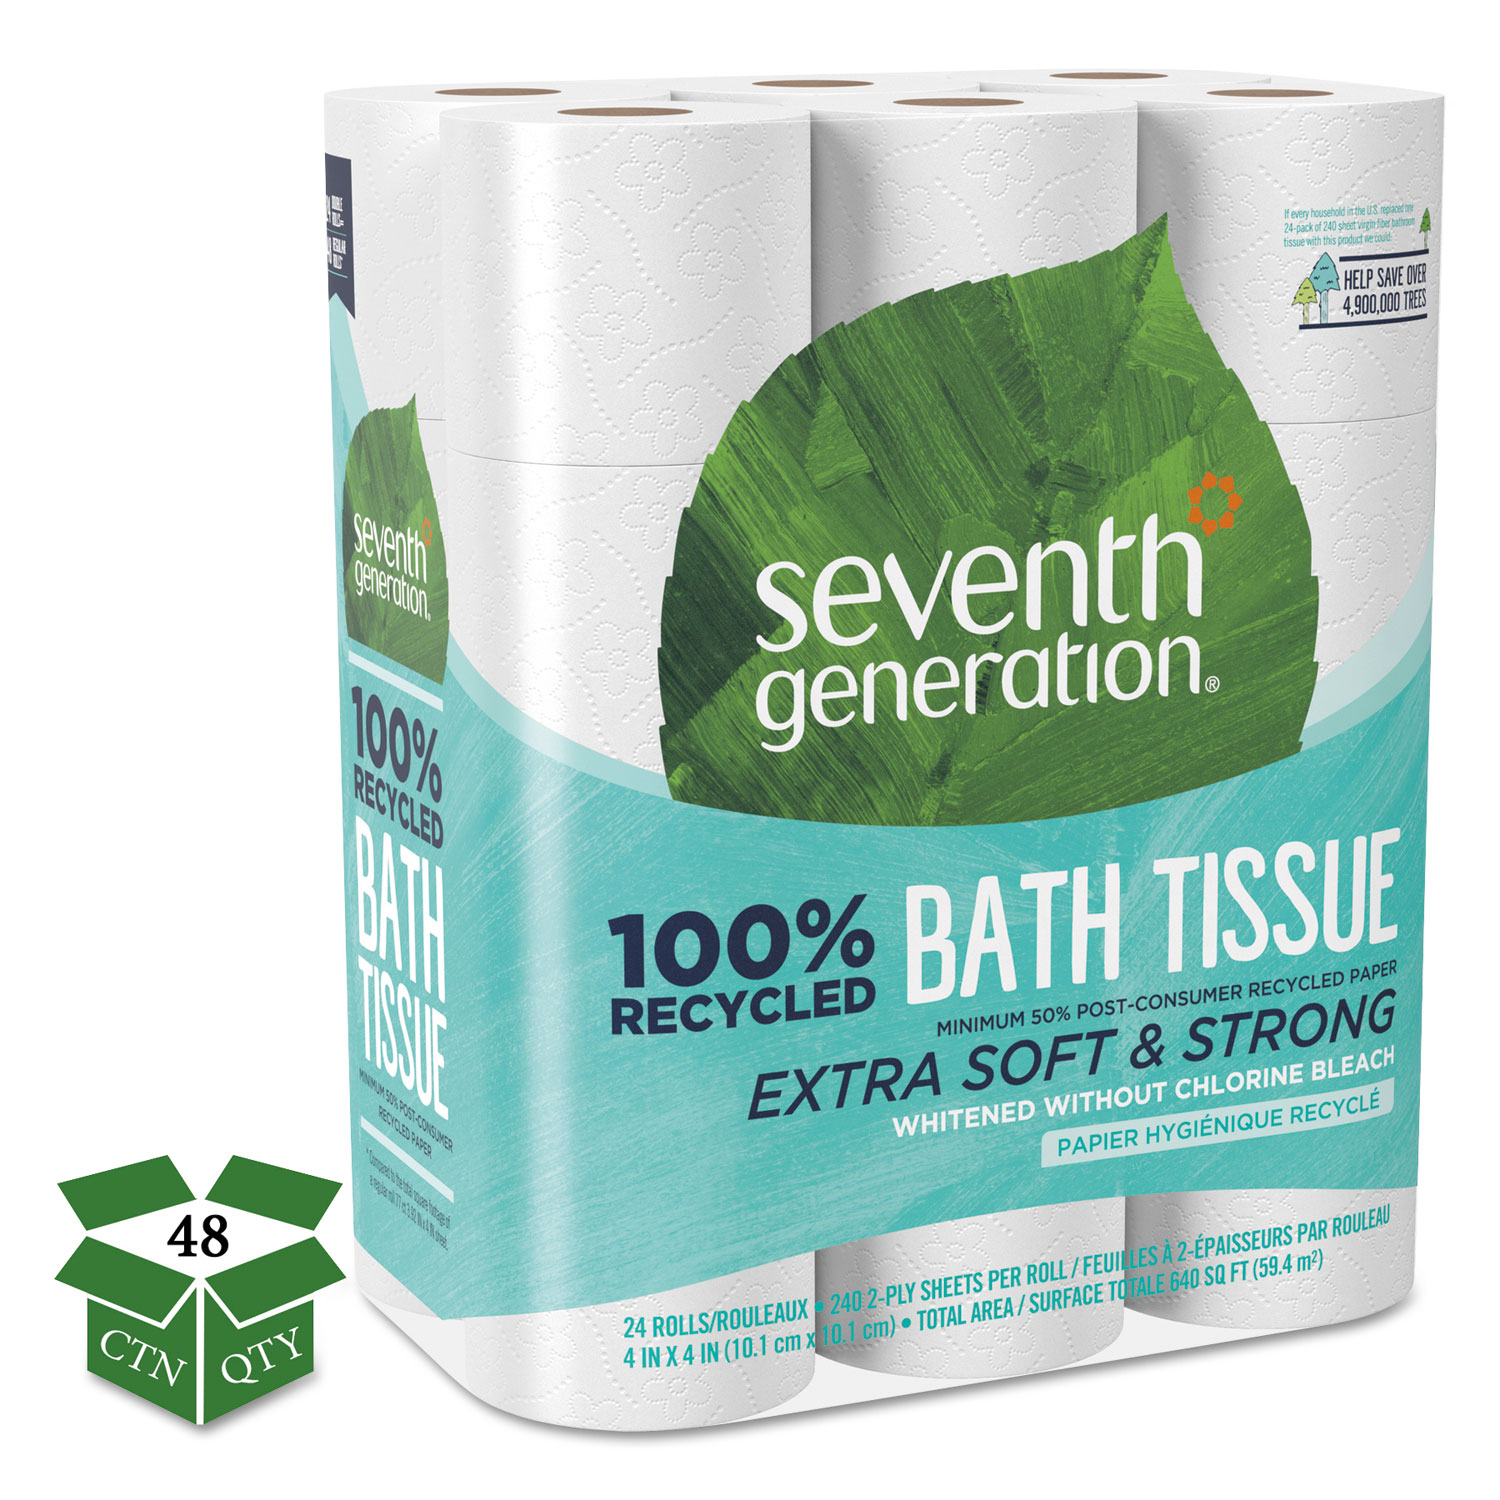  Seventh Generation SEV 13738CT 100% Recycled Bathroom Tissue, Septic Safe, 2-Ply, White, 240 Sheets/Roll, 24/Pack, 2 Packs/Carton (SEV13738CT) 